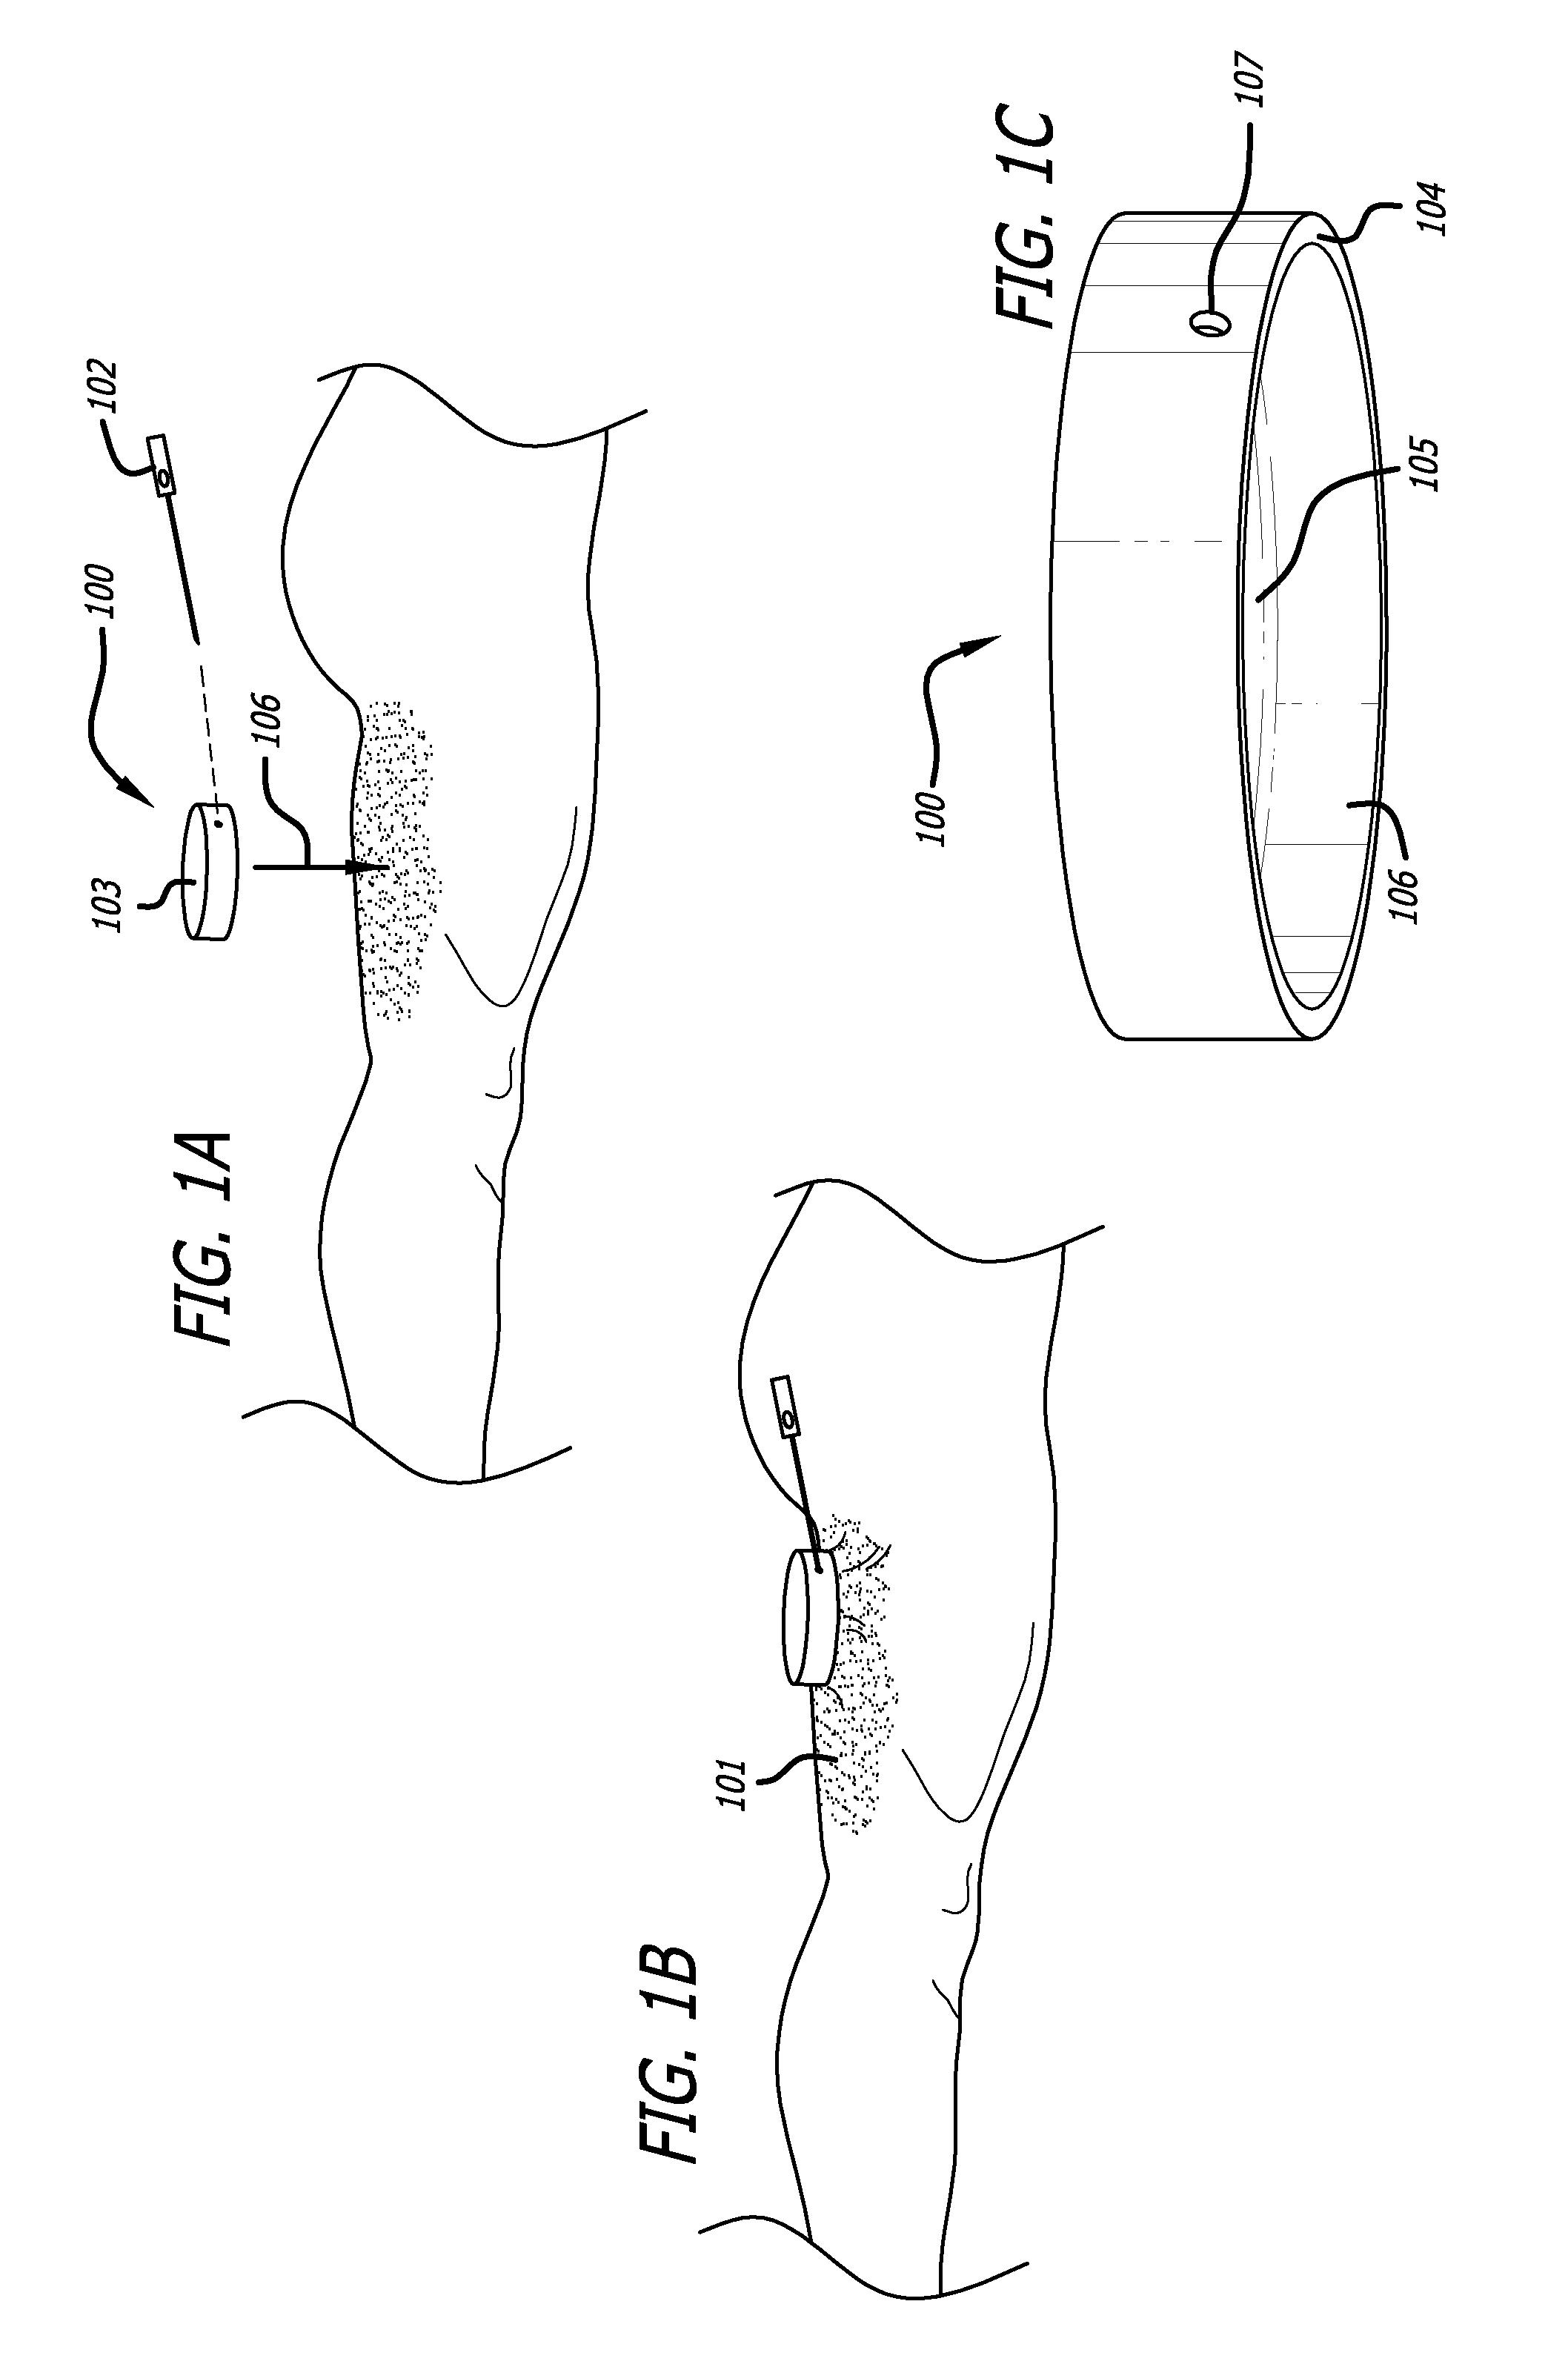 Dissection handpiece and method for reducing the appearance of cellulite